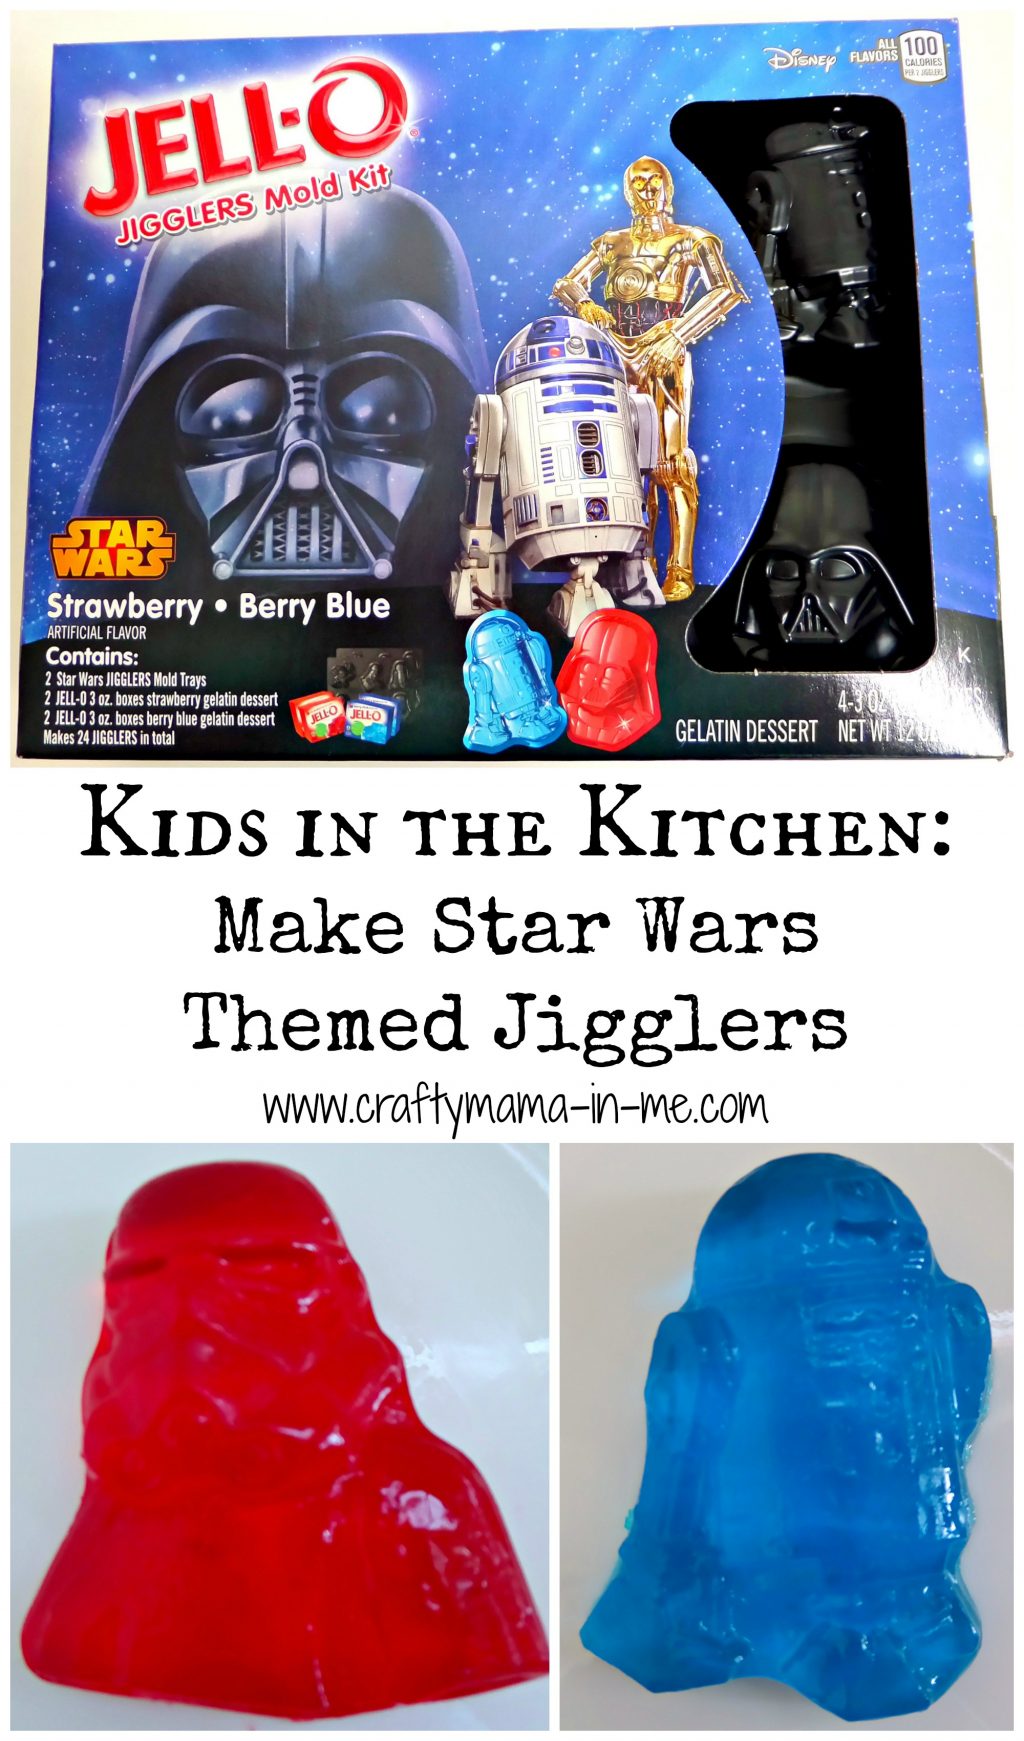 Kids in the Kitchen: Make Star Wars Themed Jigglers - Crafty Mama in ME!